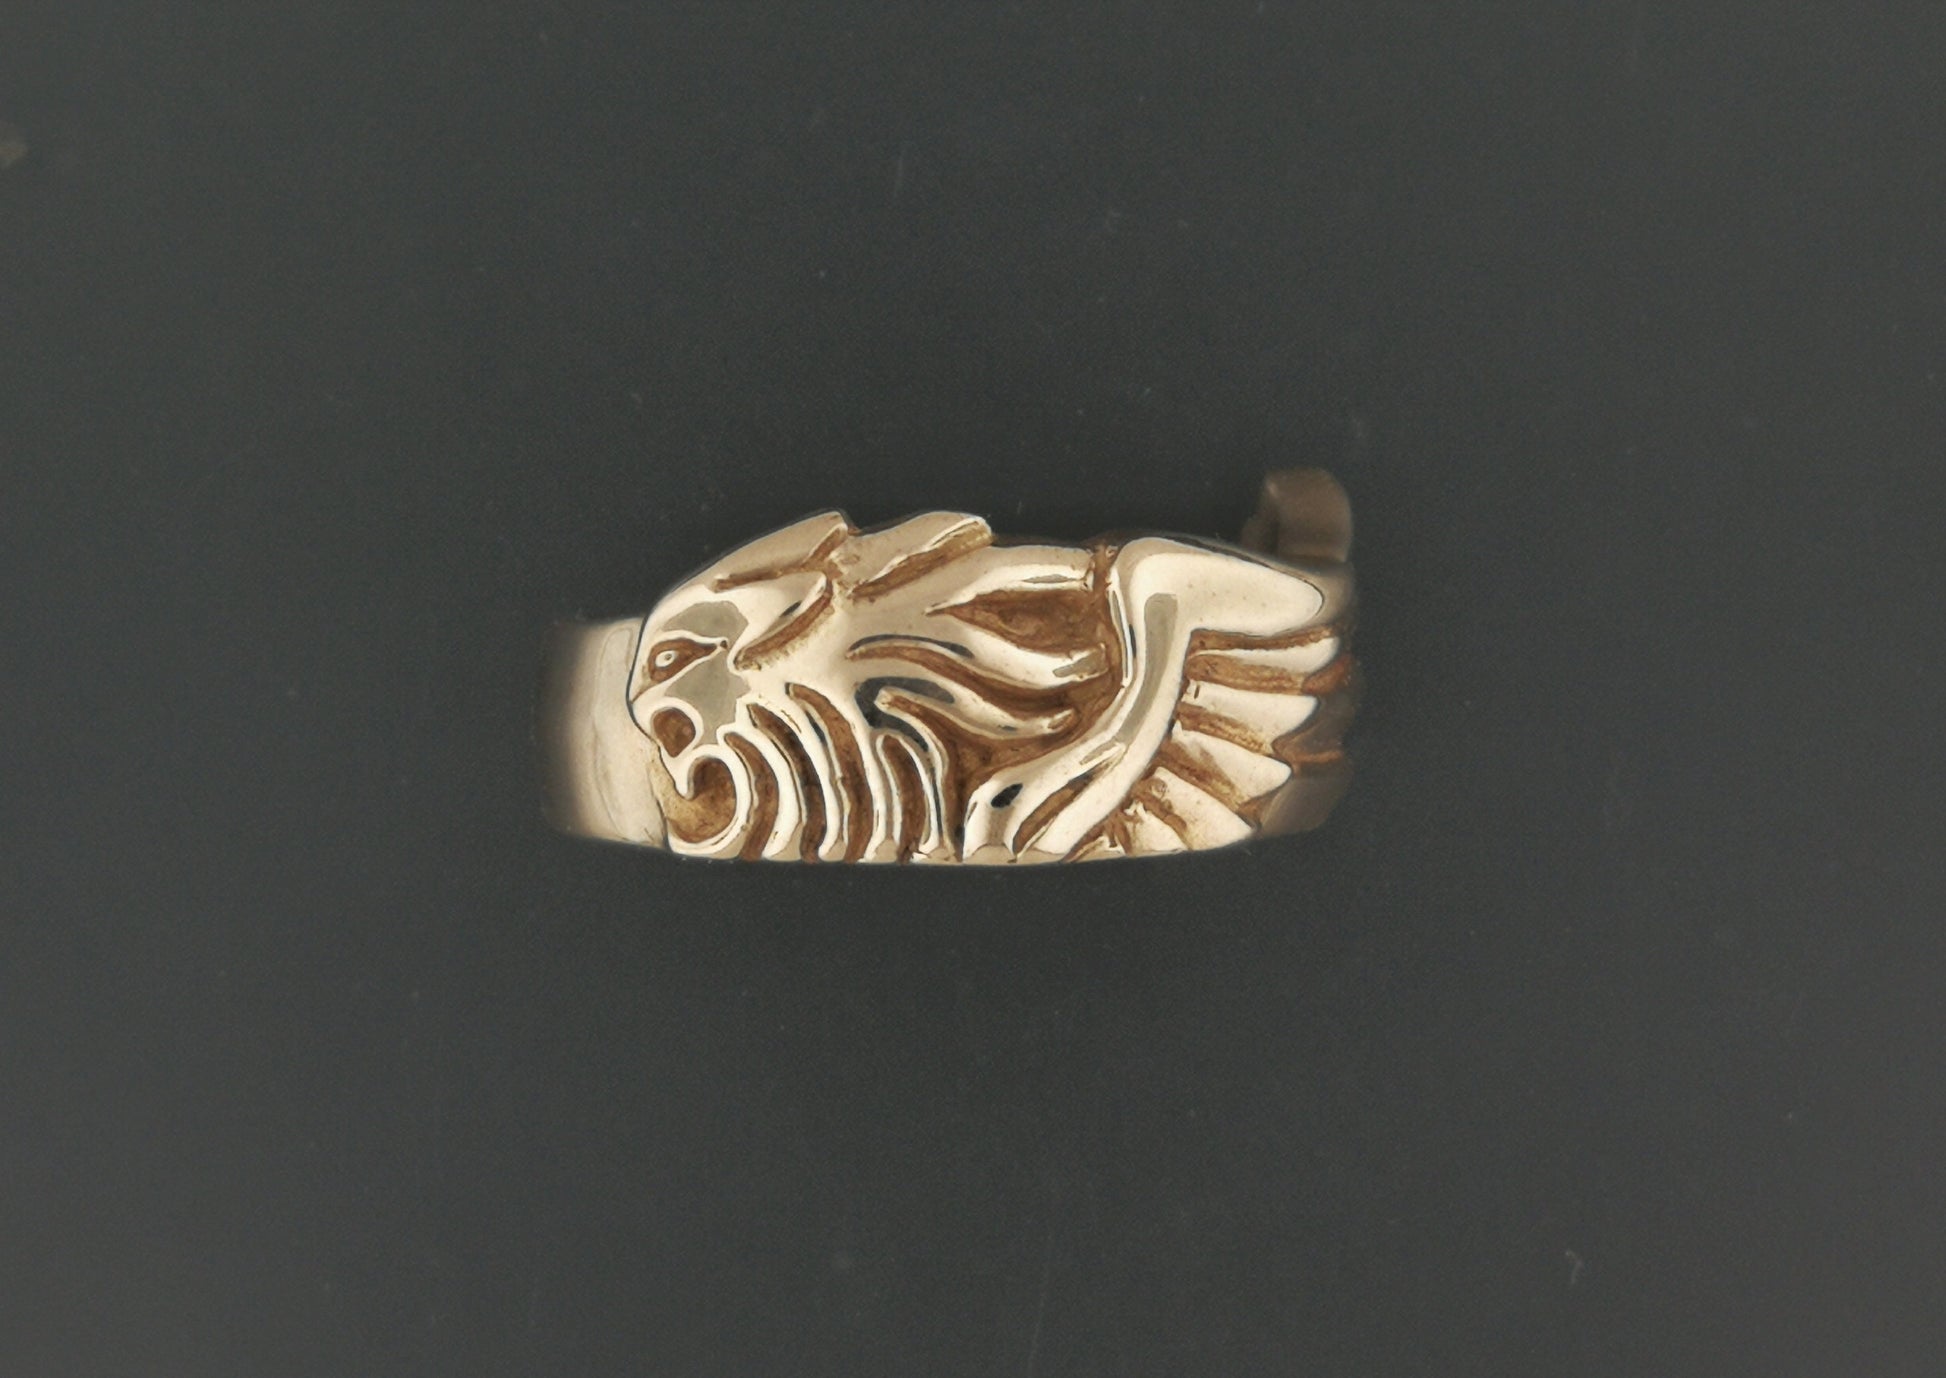 Final Fantasy 8 Squall Griever Ring, FF8 Sleeping Lion Heart Ring, FF88 Griever Ring, Final Fantasy Jewelry, Final Fantasy Ring, Squall lion Ring, Bronze Squall Cosplay Ring, Antique Bronze Final Fantasy 8 Ring, Bronze Griever Ring, Bronze FF8 Ring